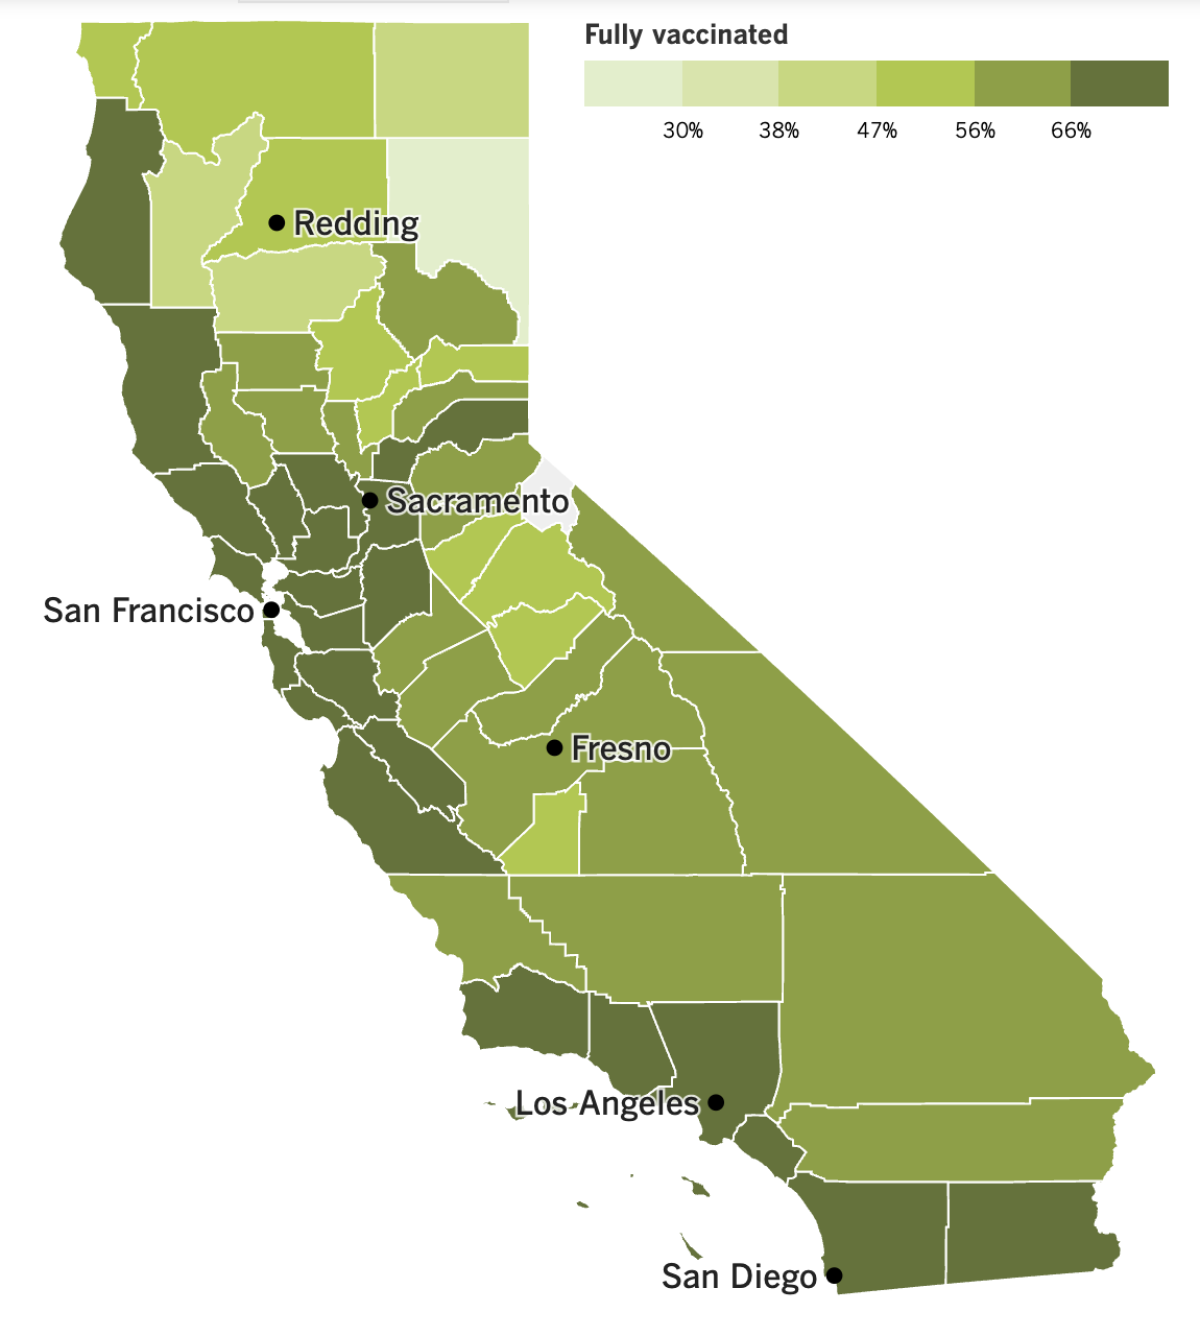 A map showing California's COVID-19 vaccination progress by county as of March 14, 2023.